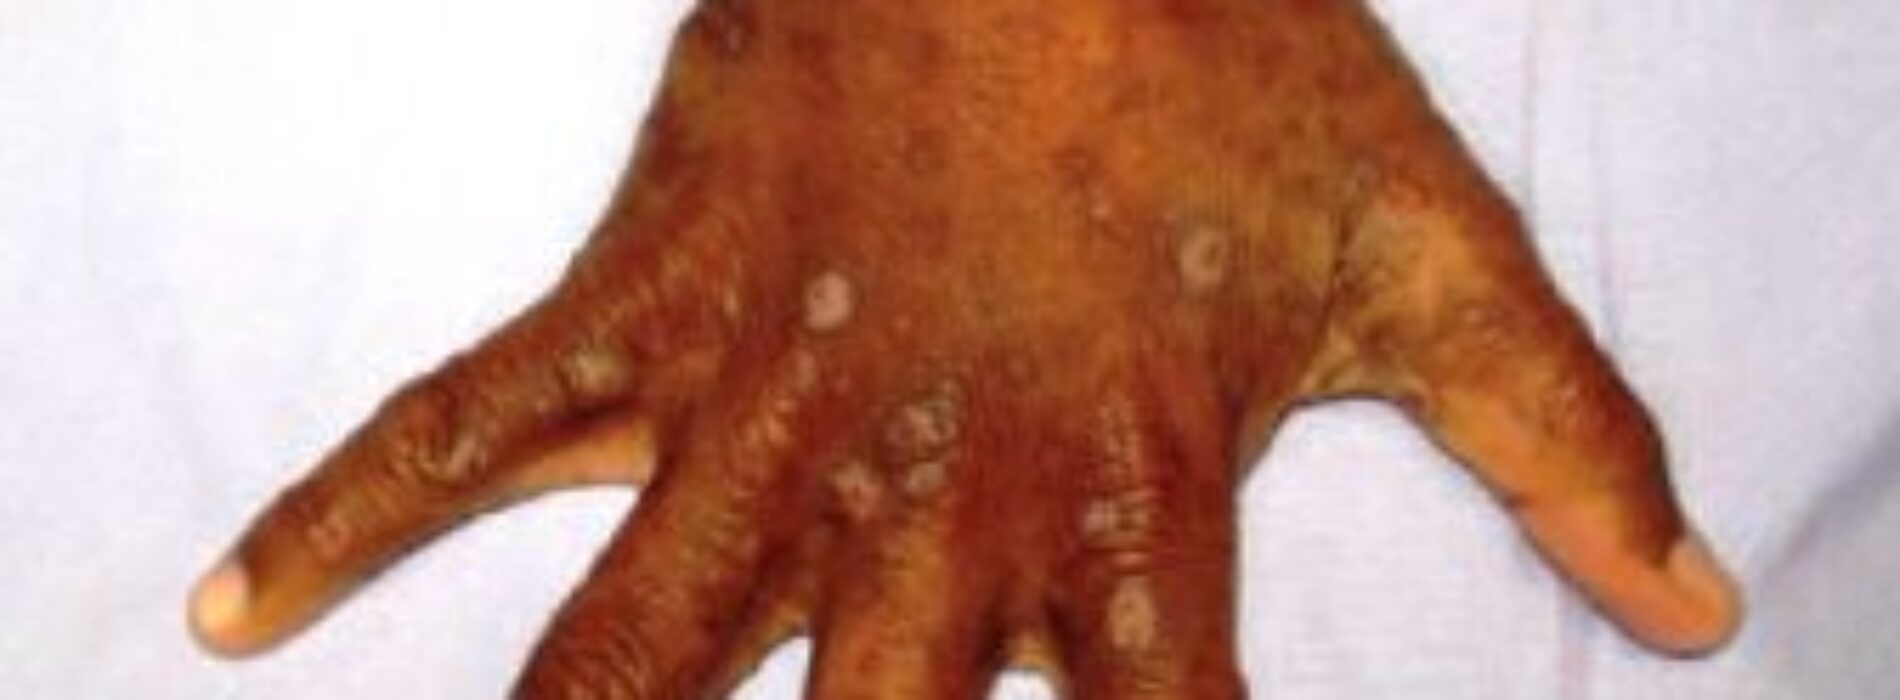 Is scabies incurable?